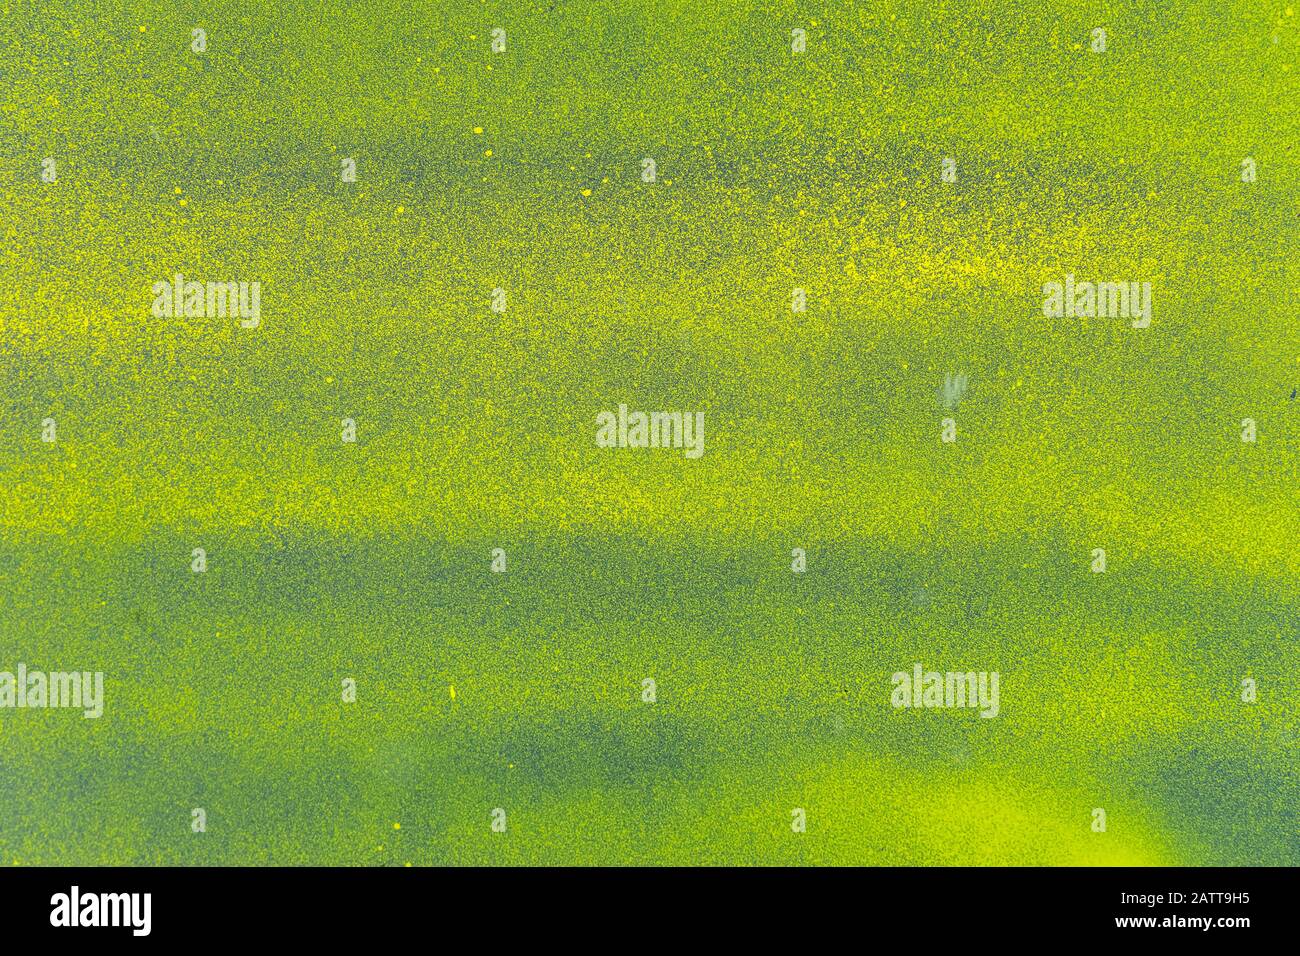 Metal sheet sprayed with bright green-yellow paint. With slight horizontal stripes. The surface smeared,  with dirt. Abstract colorful texture backgro Stock Photo